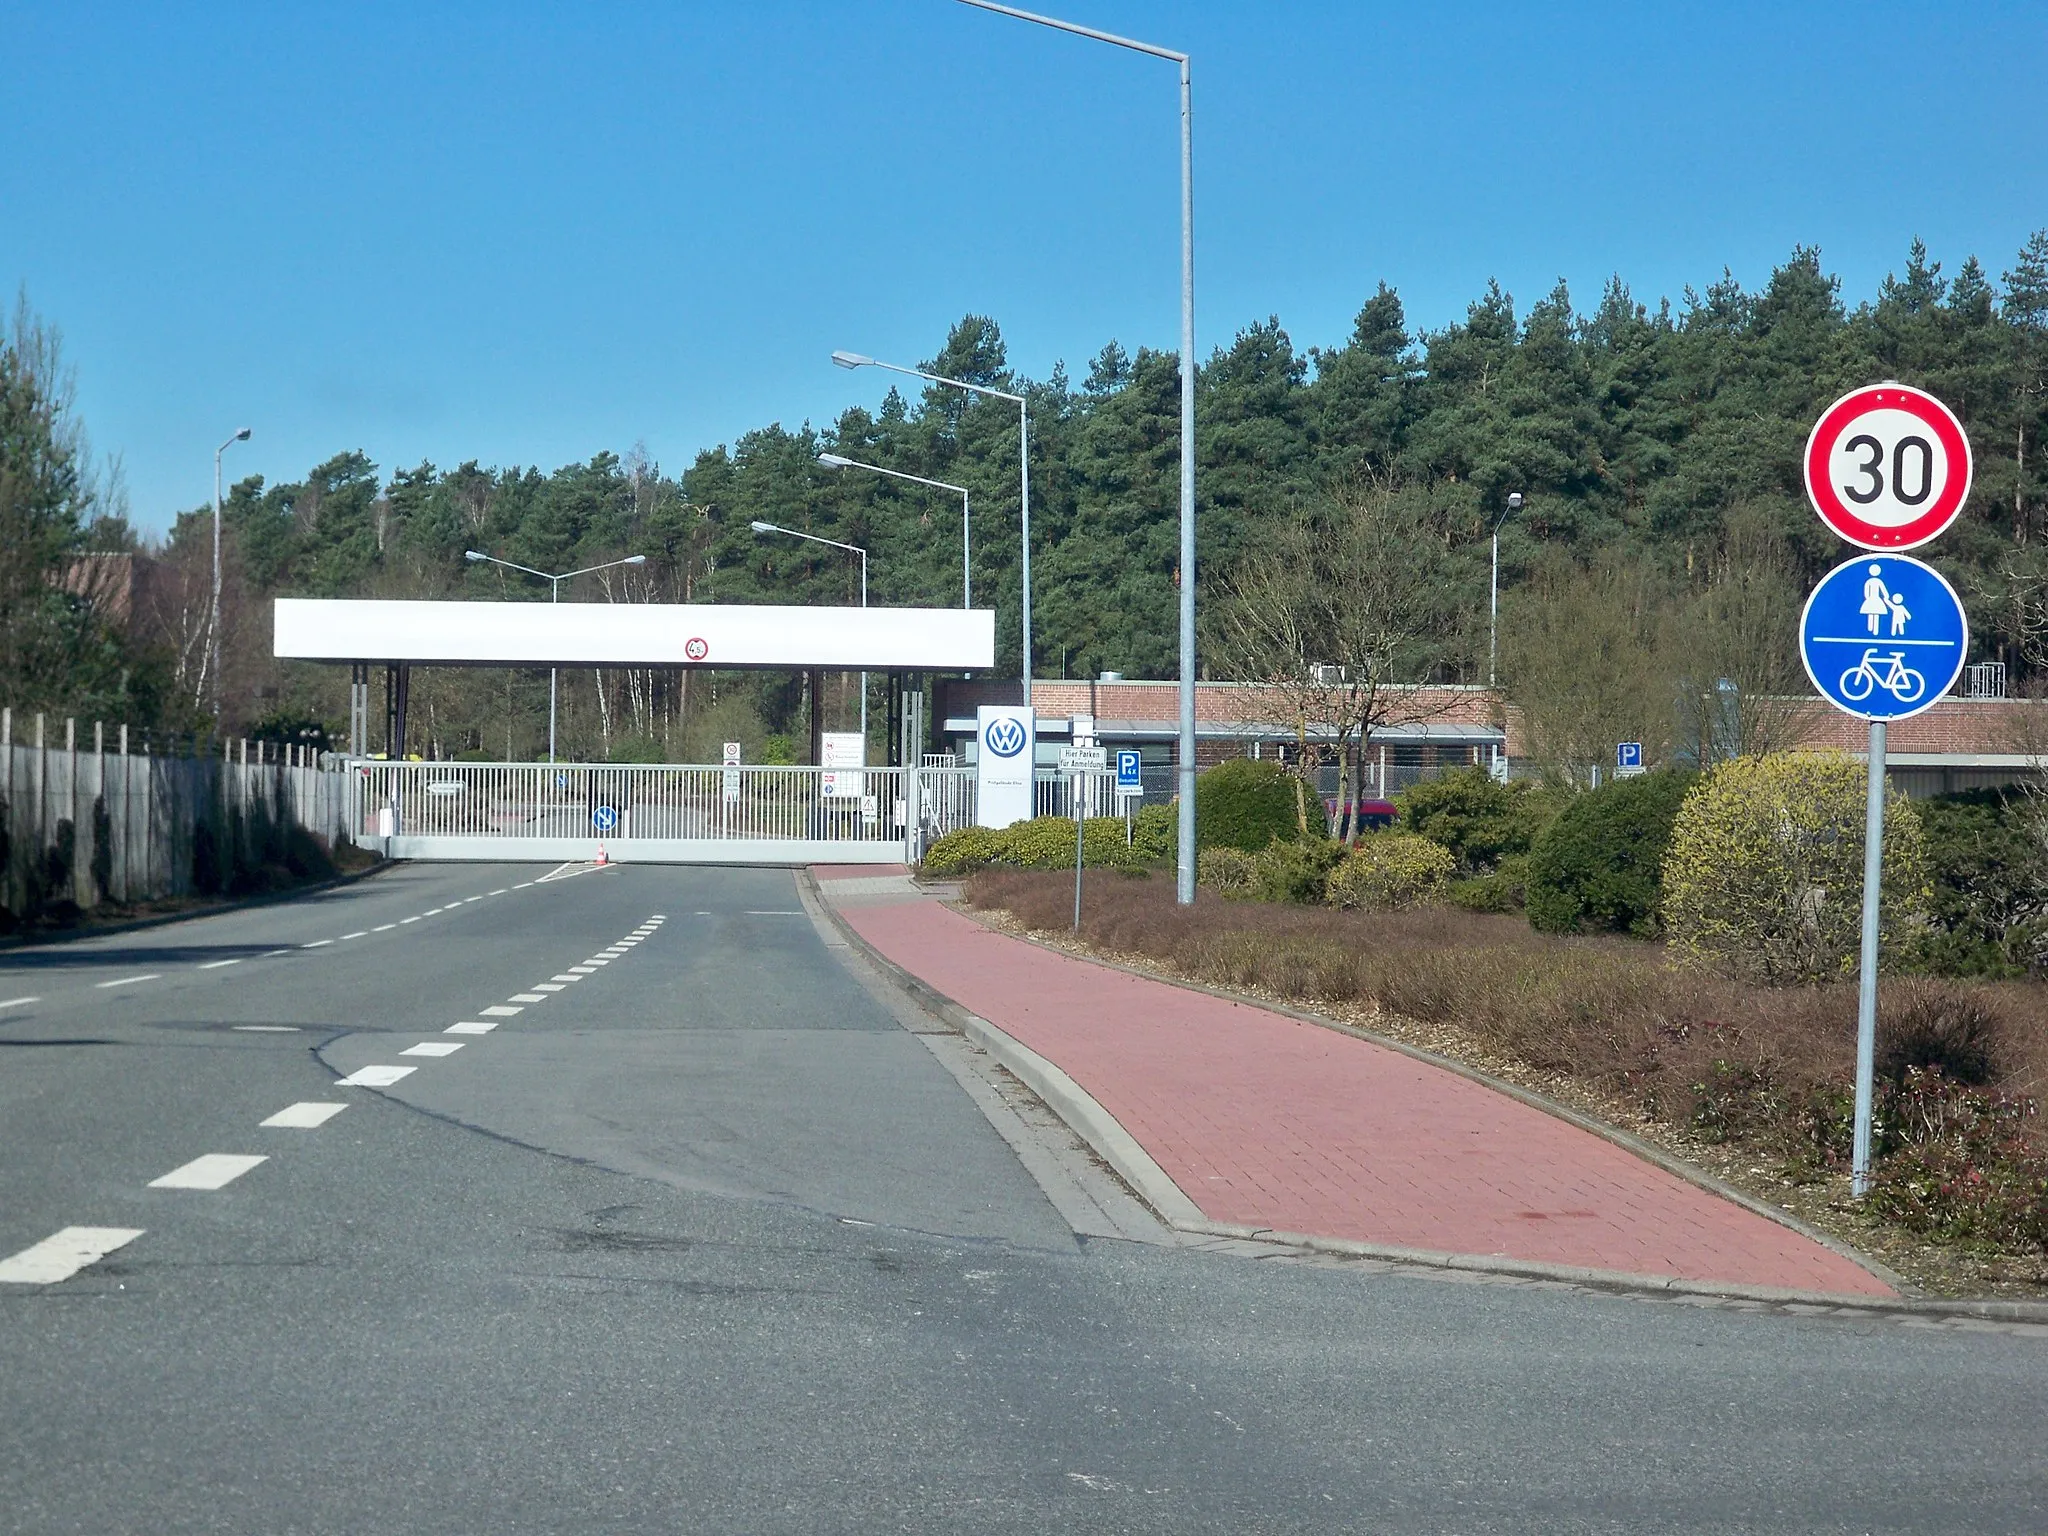 Photo showing: Ehra-Lessien, Lower Saxony, main gate to VW area for test drives